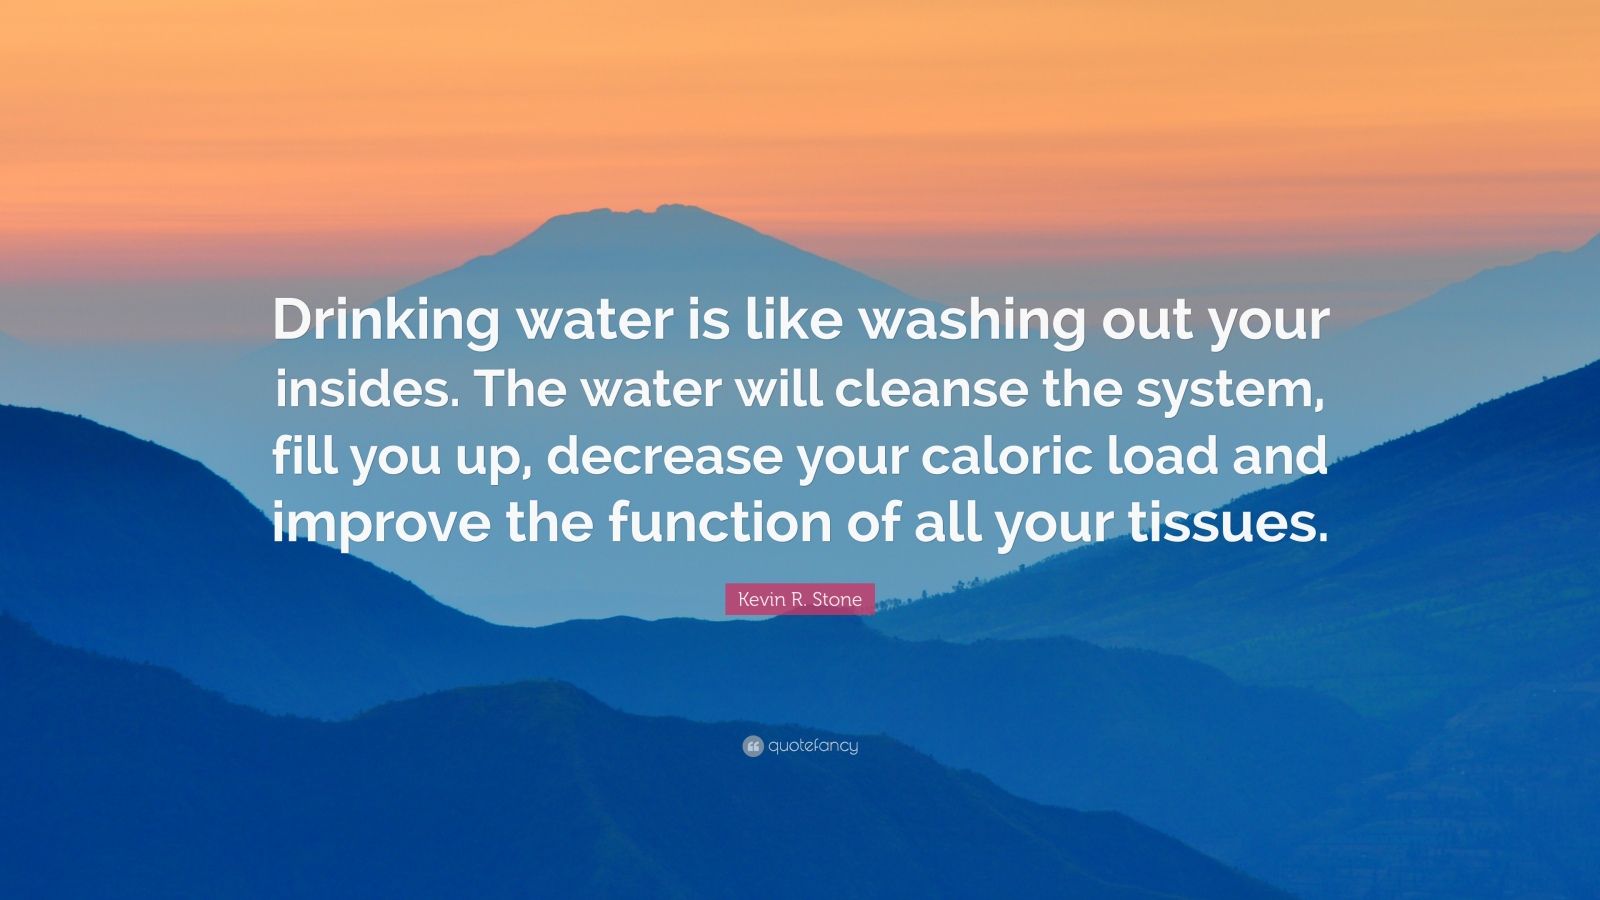 Kevin R. Stone Quote: “Drinking water is like washing out your insides ...